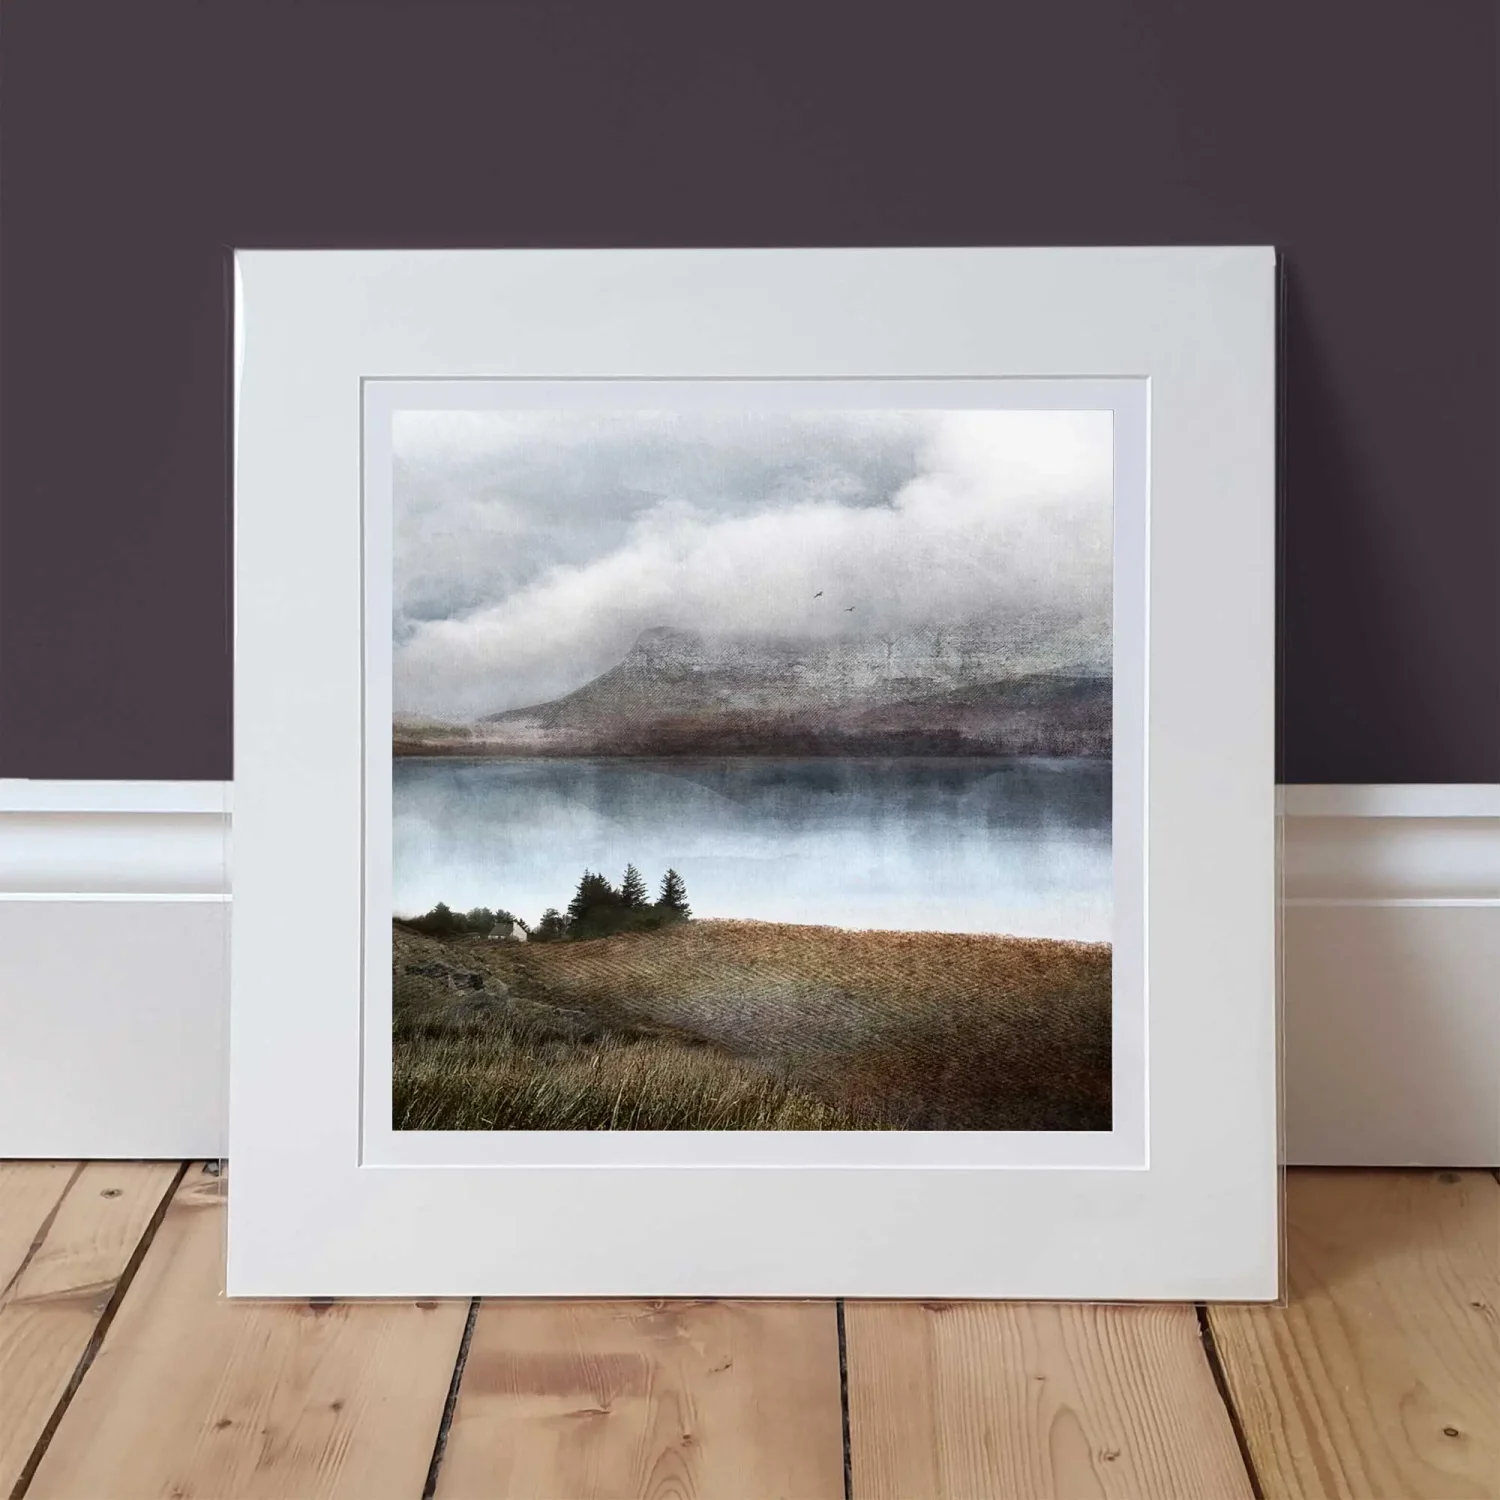 A Scottish, Highland view art print, of Little Loch Broom. There's a wee croft and trees in the foreground, with a silvery, blue loch and hen mountains in the background which fade into dramatic clouds. There's 2 birds in the sky just over the top of the mountains. The print is in a mounted window and is shown on a wooden floor with a background of a plum coloured wall.